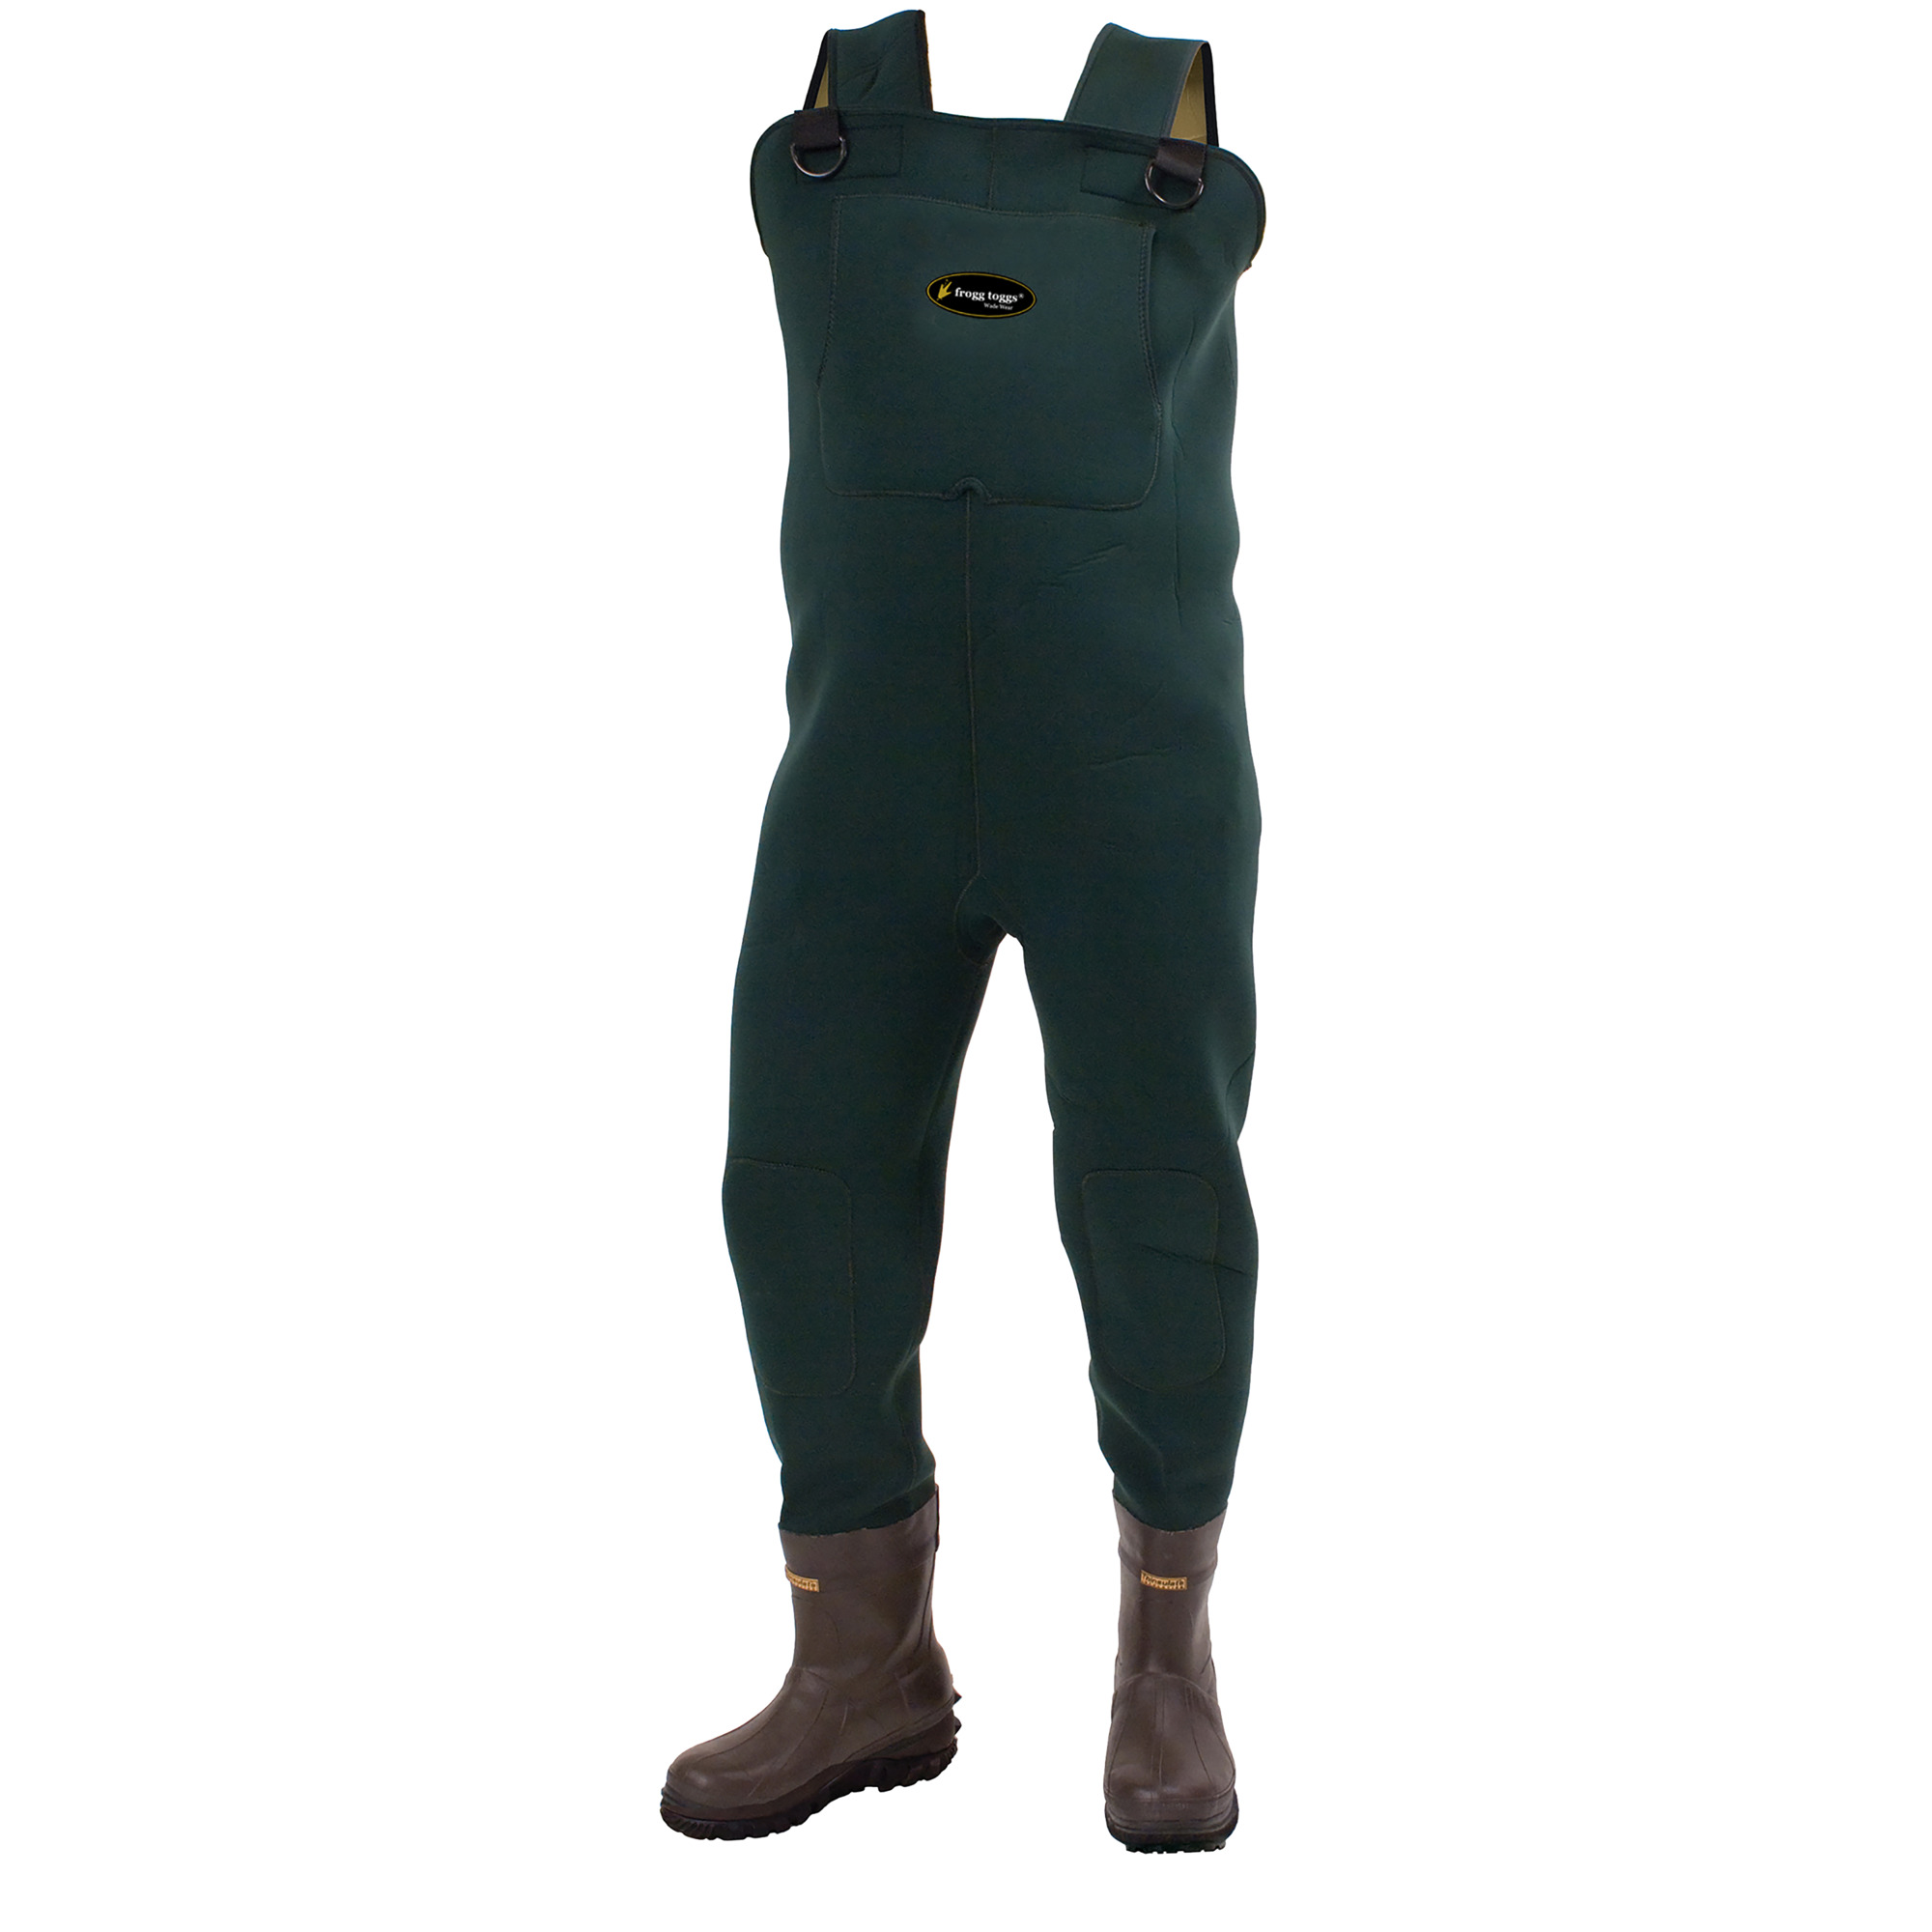 frogg toggs, Men's Amphib Bootfoot Neoprene Cleated Chest Wader, Size 12,  Width Medium, Color Forest Green, Model# 2713243-12